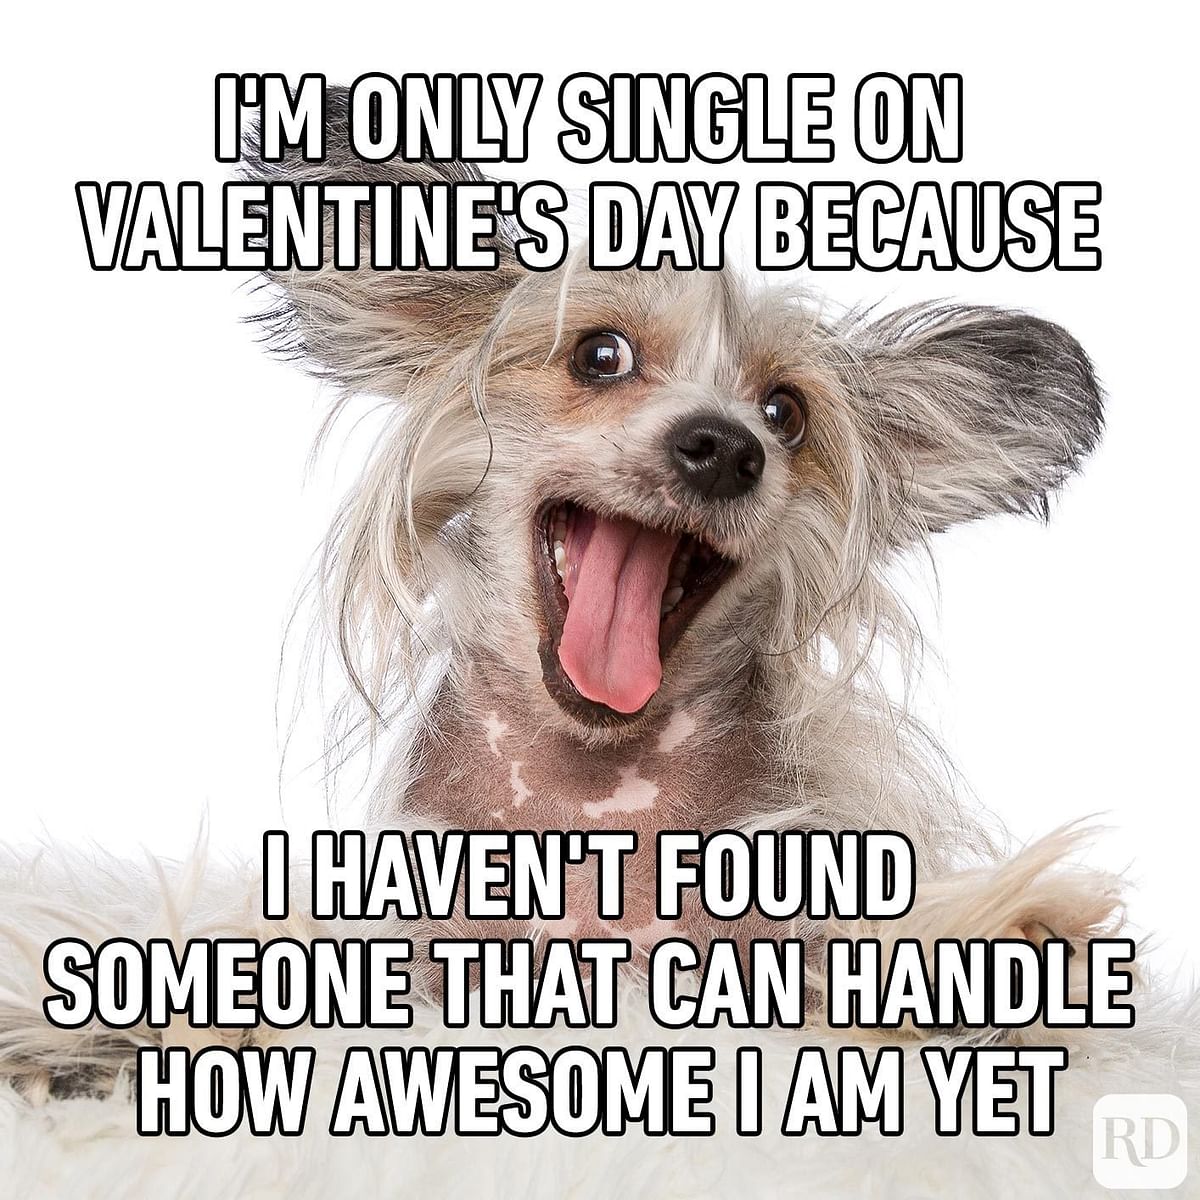 valentine-s-day-2022-jokes-funny-memes-images-quotes-for-singles